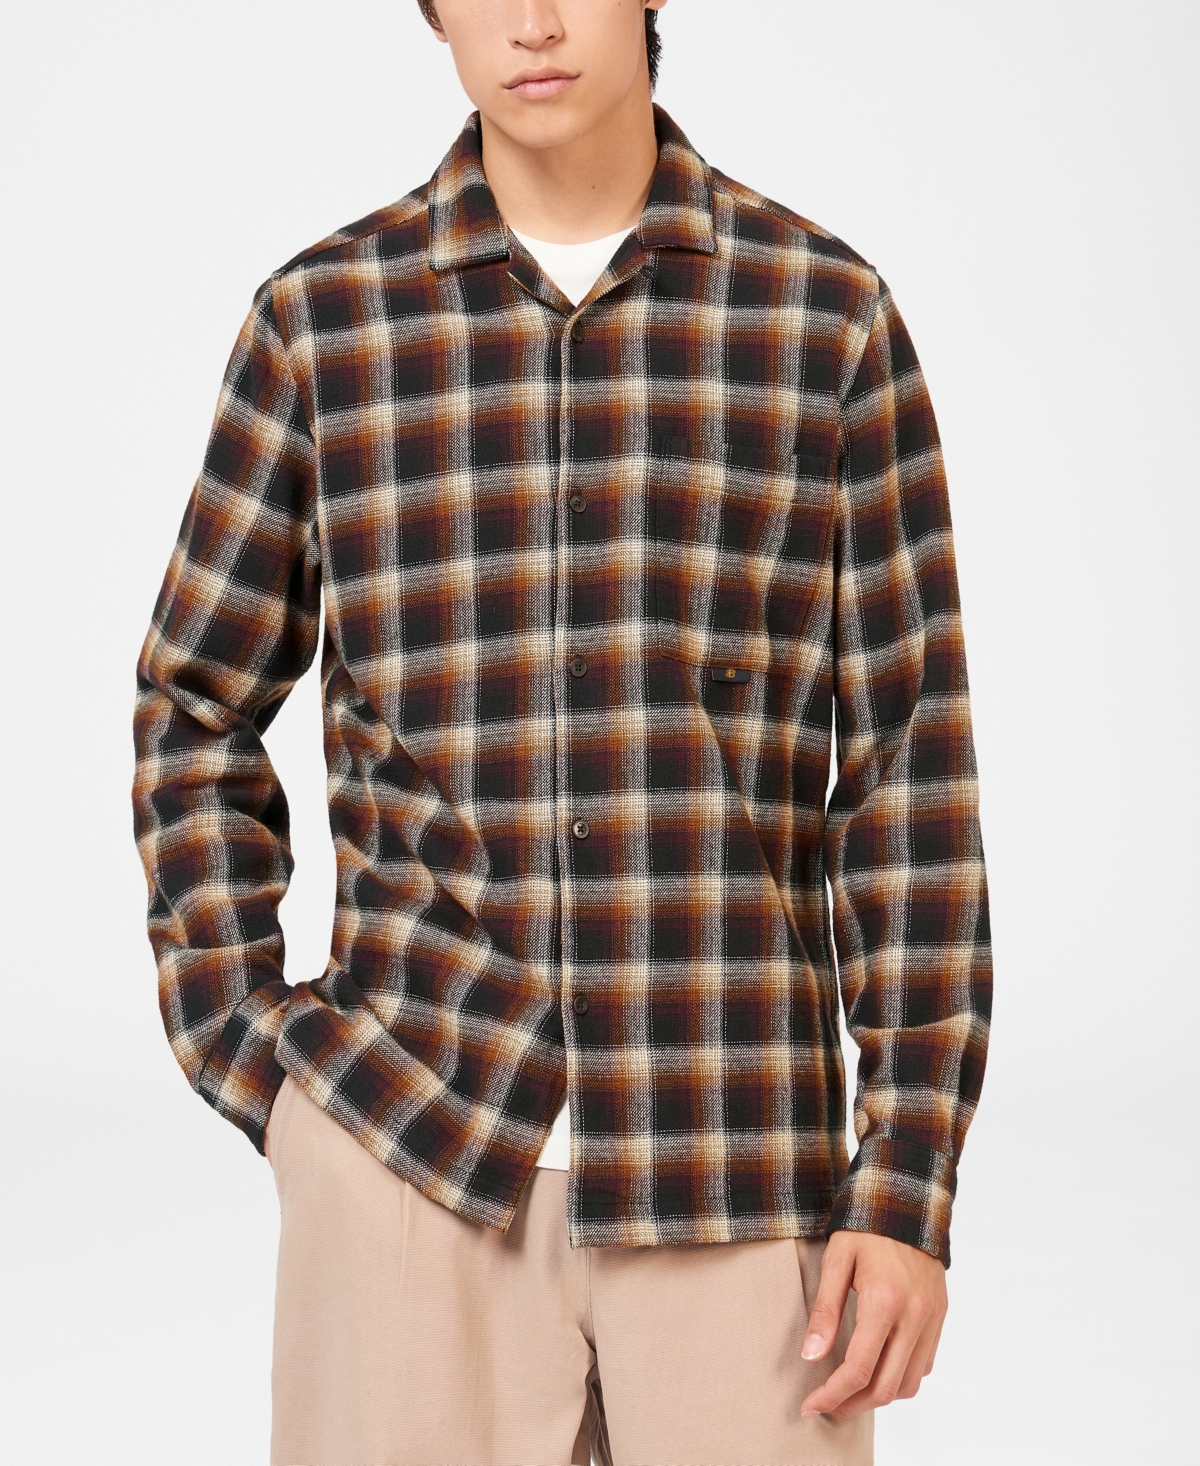 Men's Brushed Ombre Plaid Shirt - Utility Brown